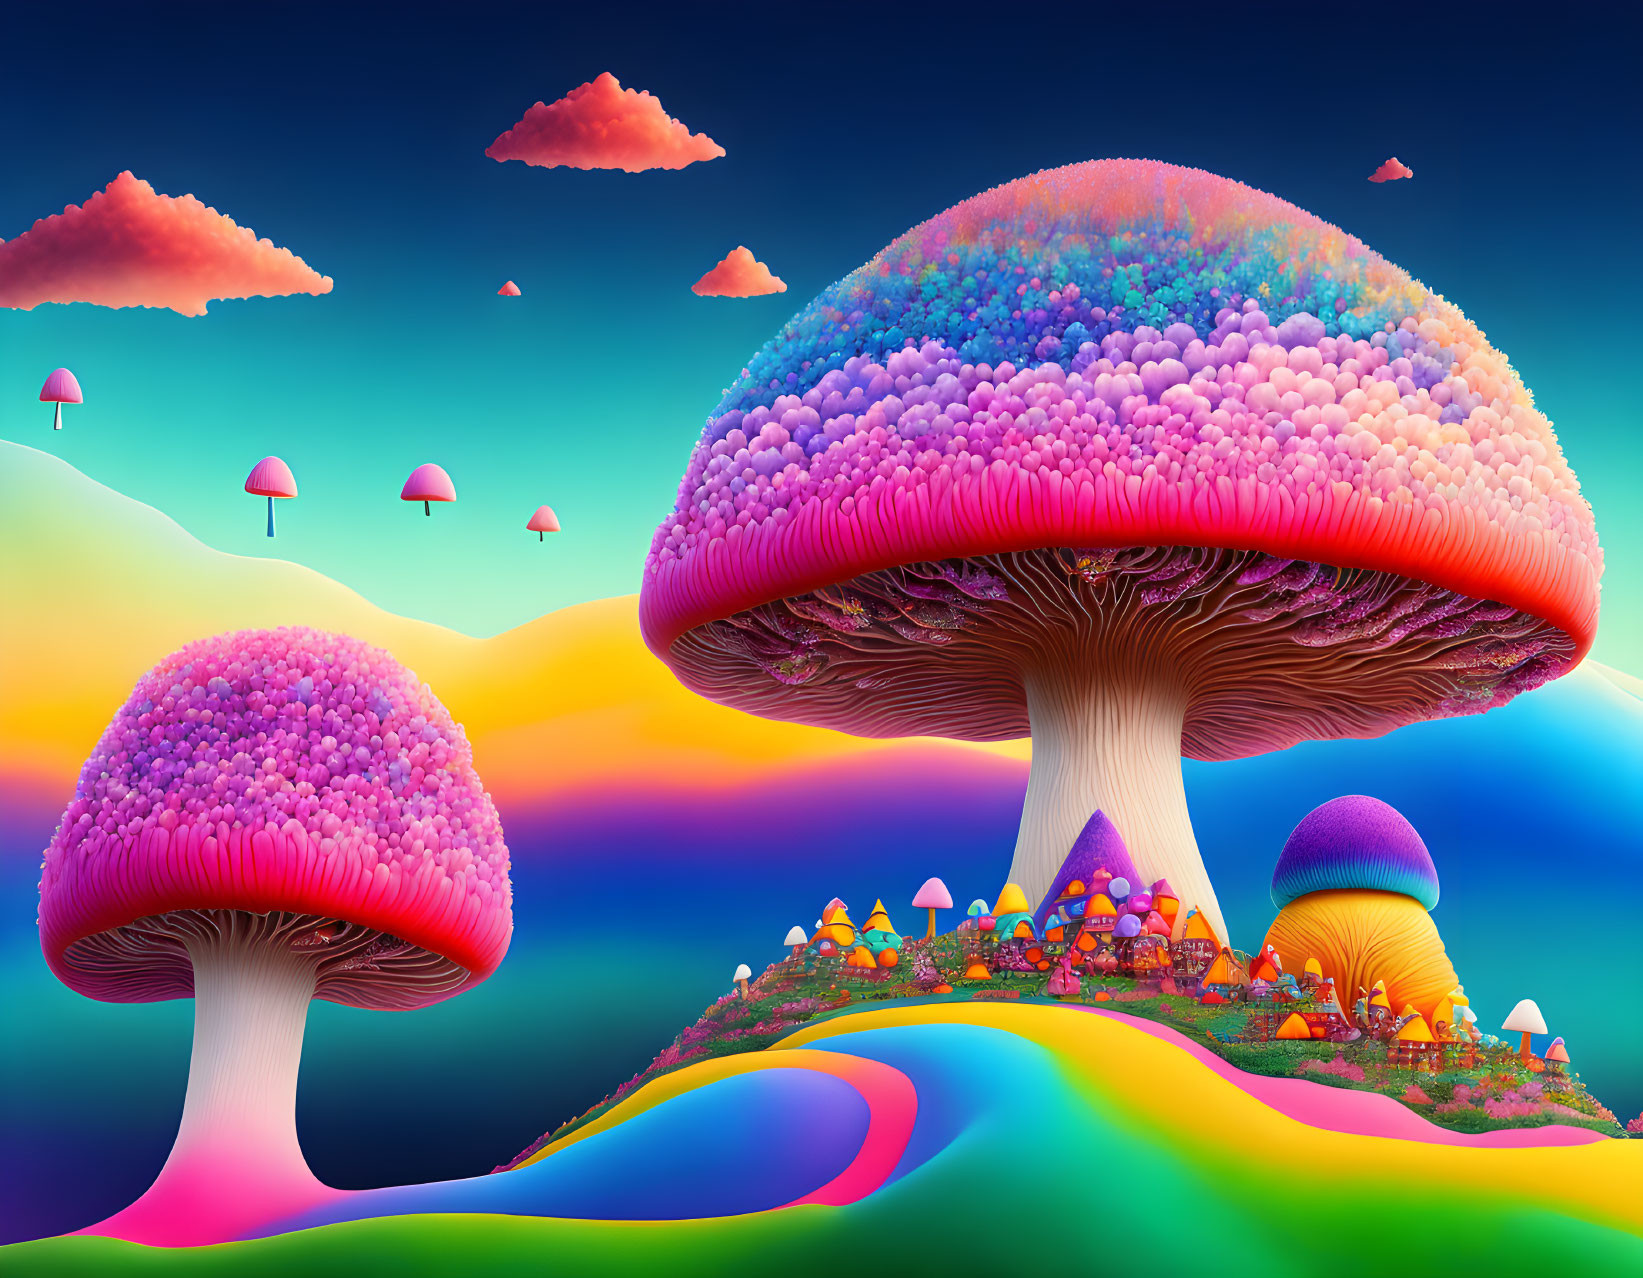 Colorful surreal landscape with giant mushroom structures and whimsical houses under rainbow sky.